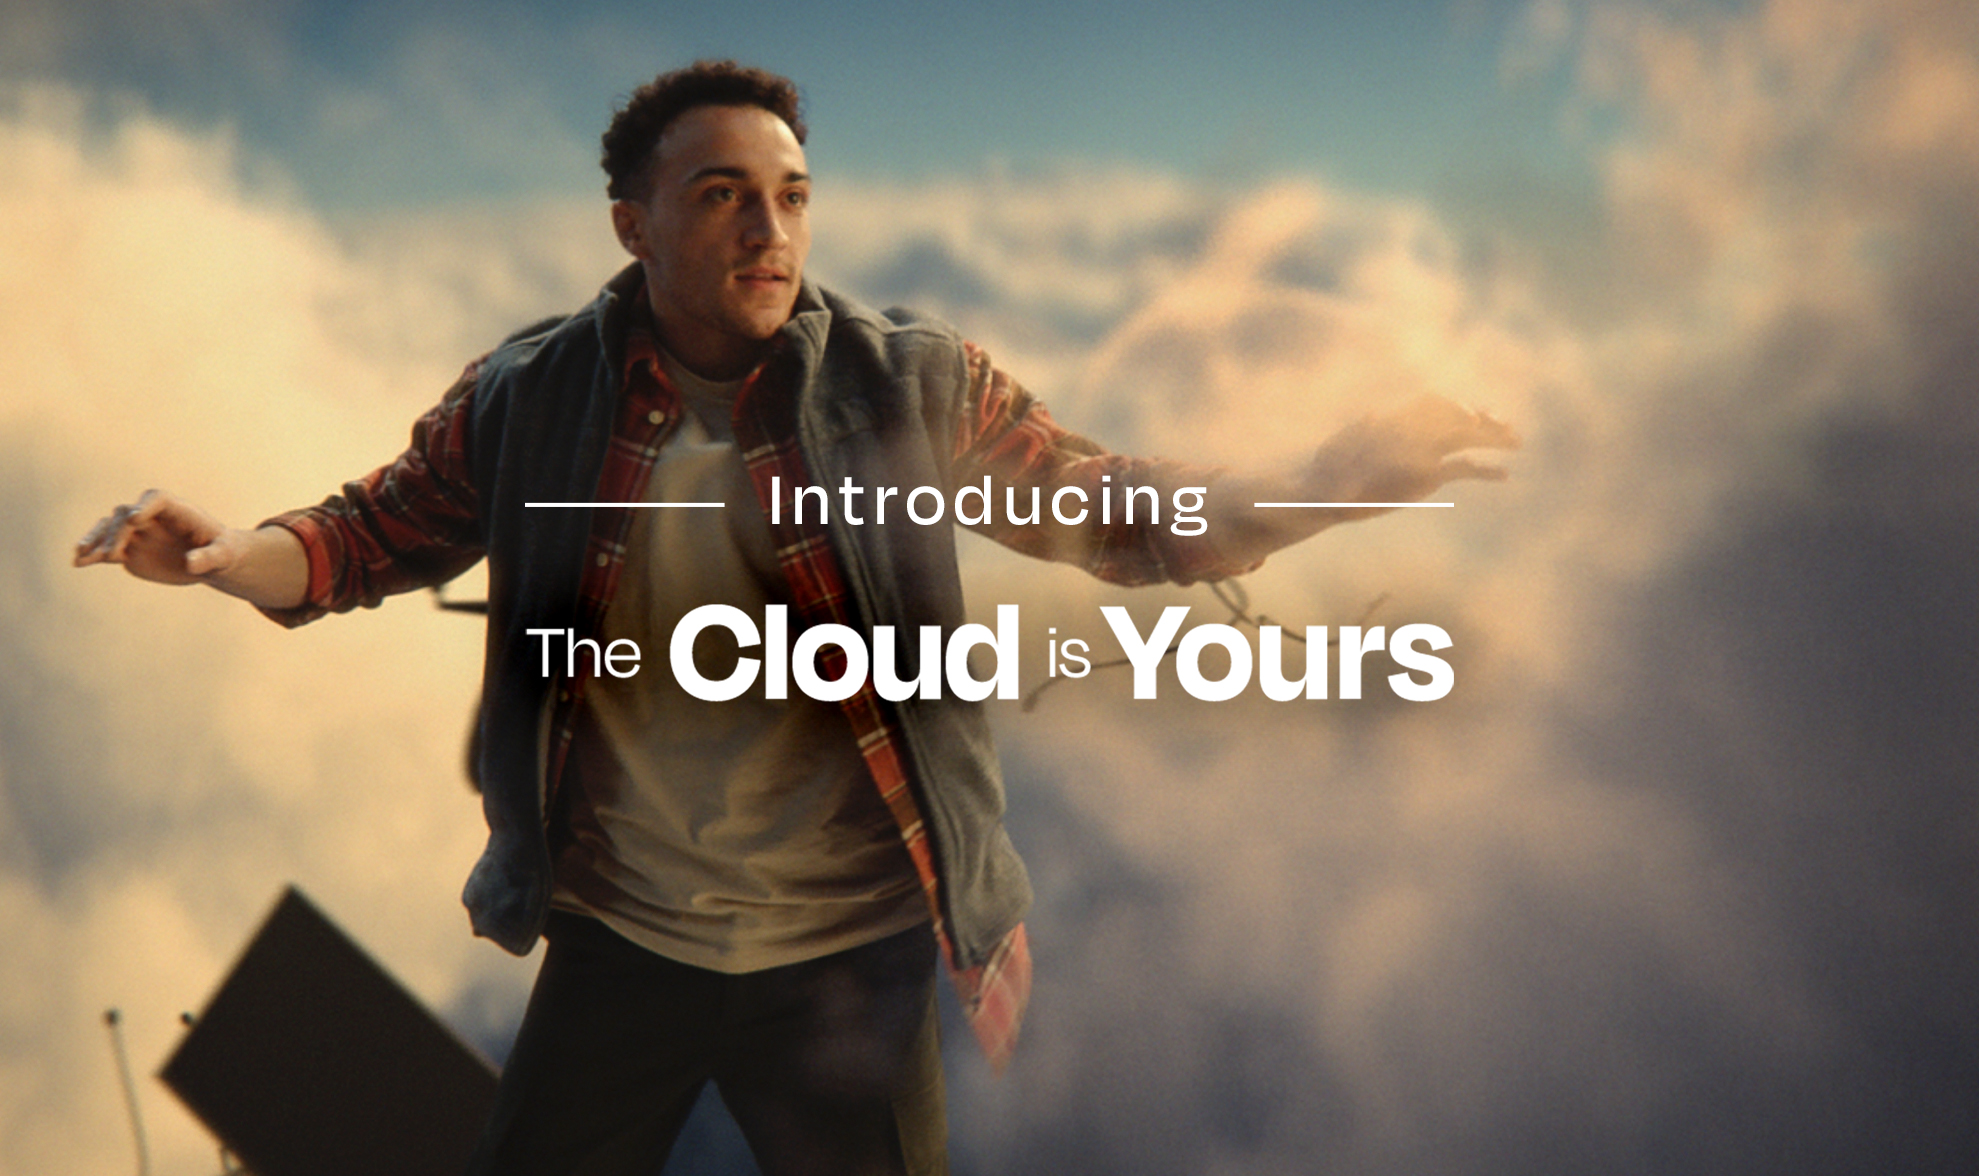 The Cloud is Yours: a rallying cry for everyone who manages, uses, and secures the cloud, bringing empowerment and transparency to every business.